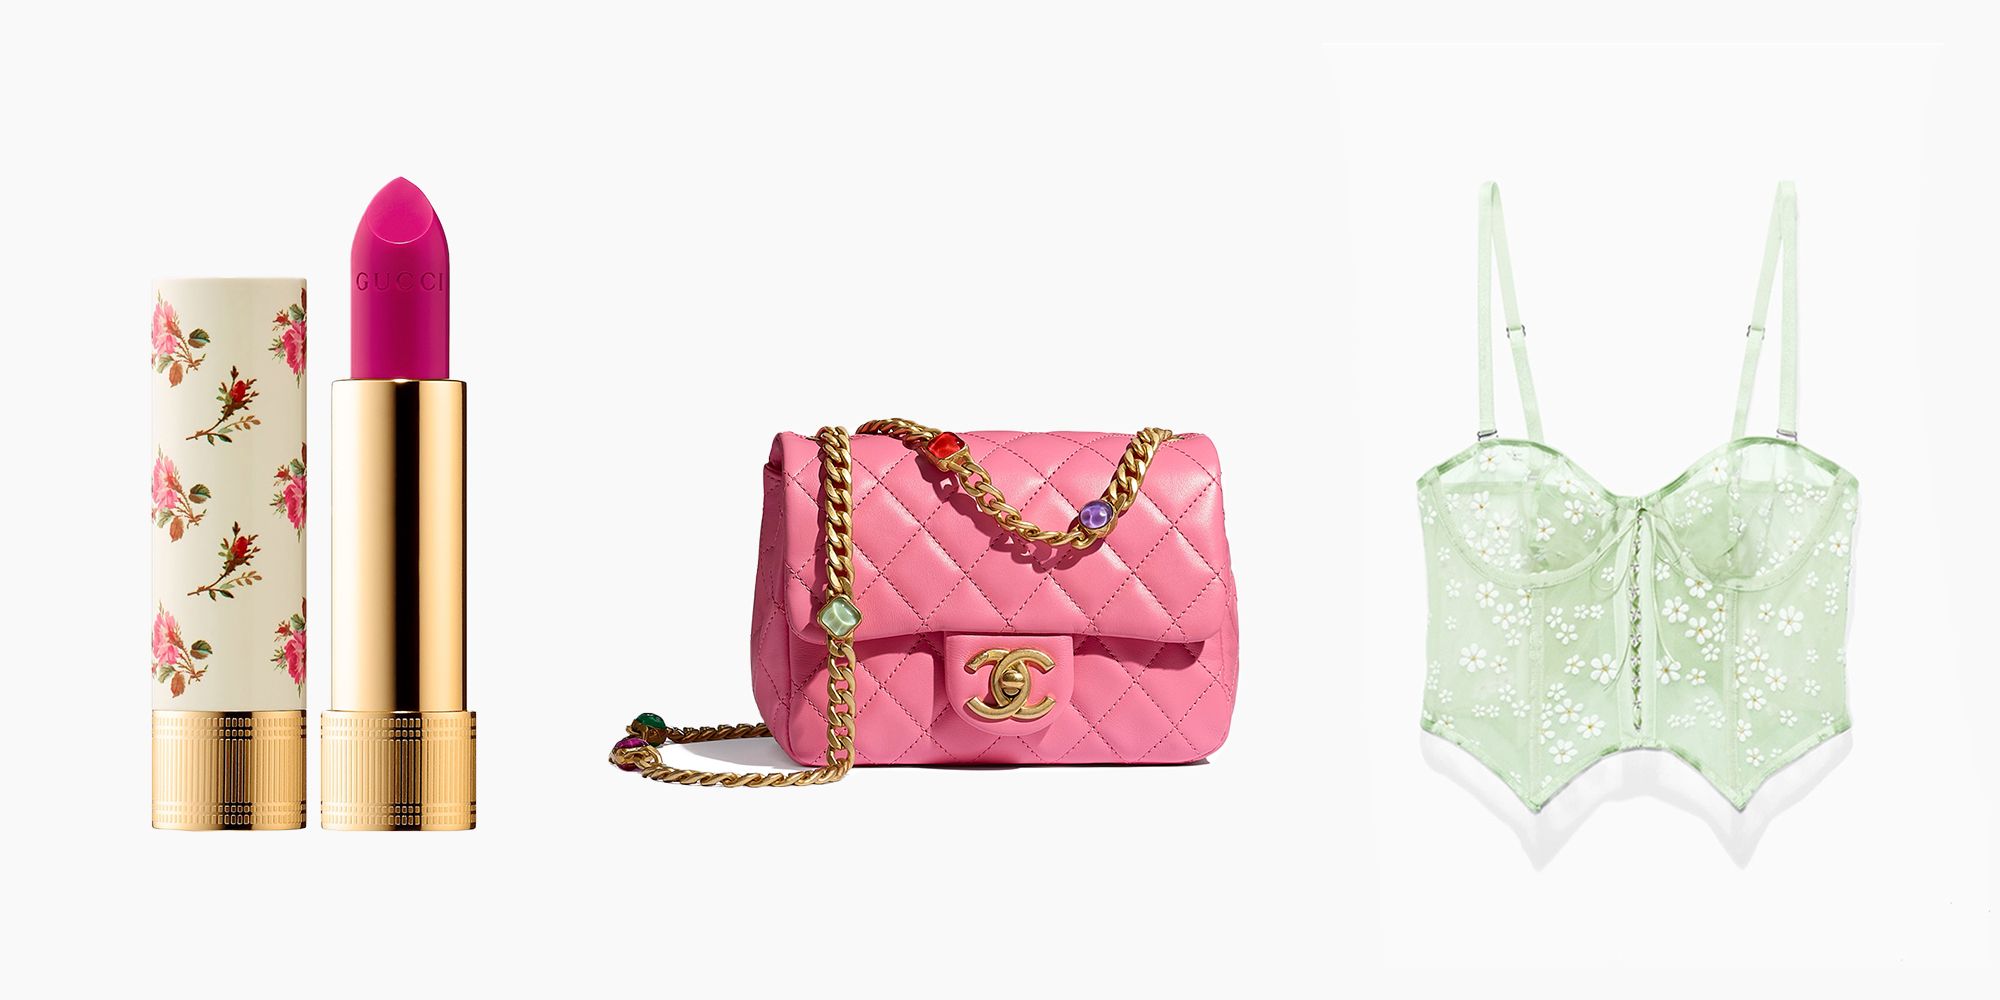 Best Valentine's Day gifts: Macy's just discounted a ton of V-Day presents